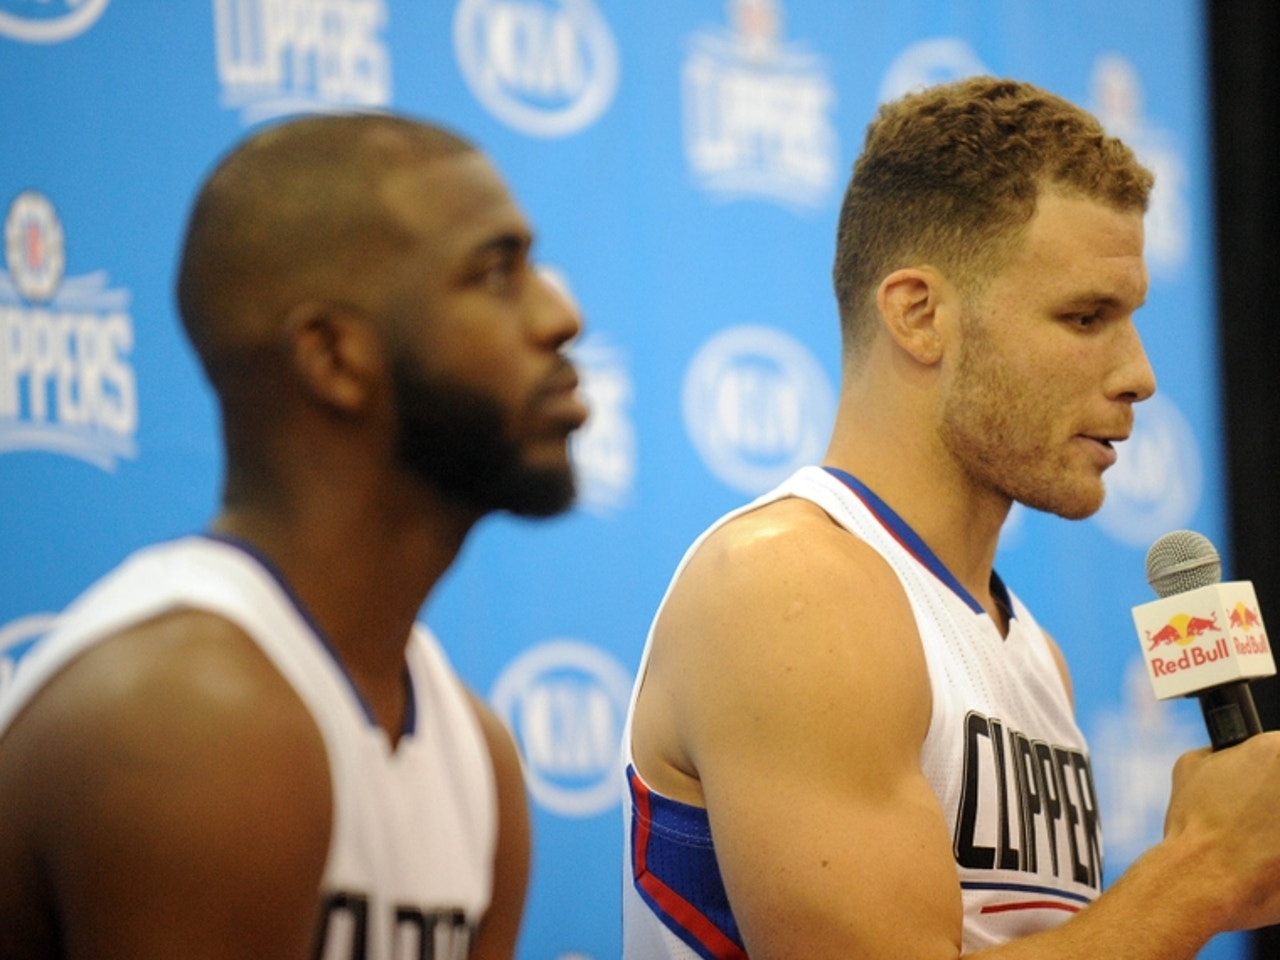 Blake Griffin: Should The Clippers Retire His Jersey?